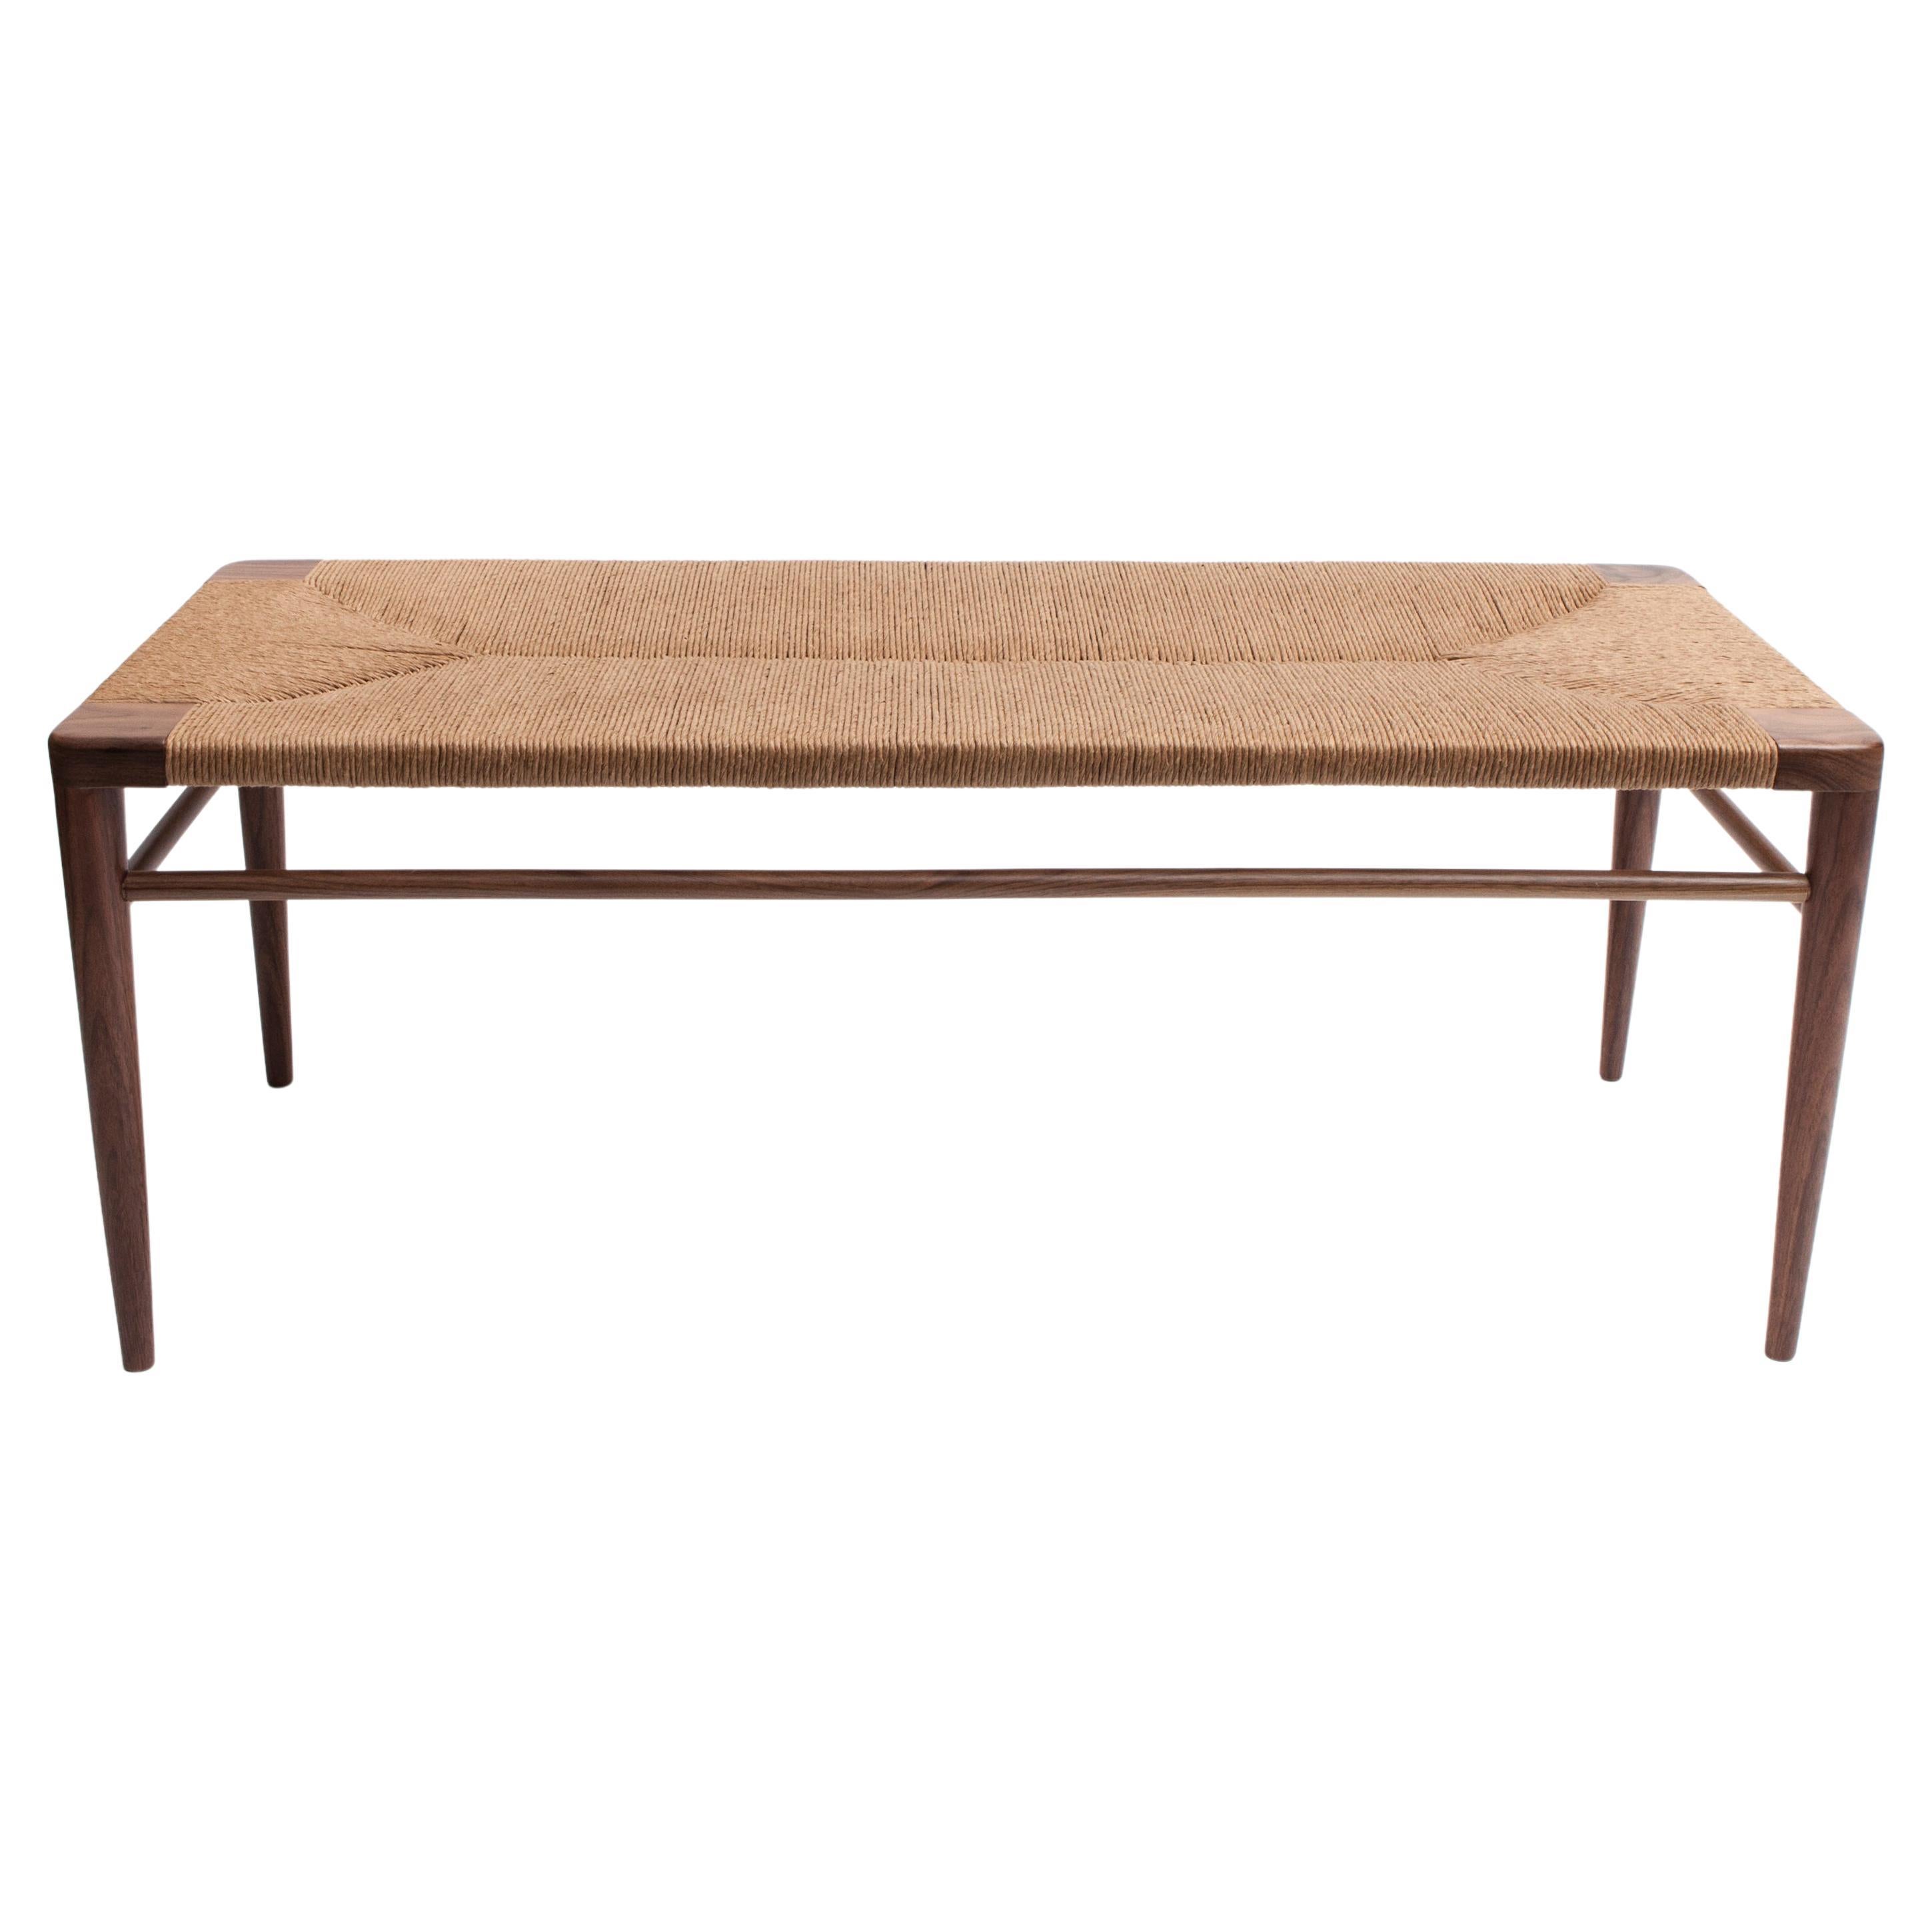 44" Woven Rush Bench in Walnut by Mel Smilow For Sale